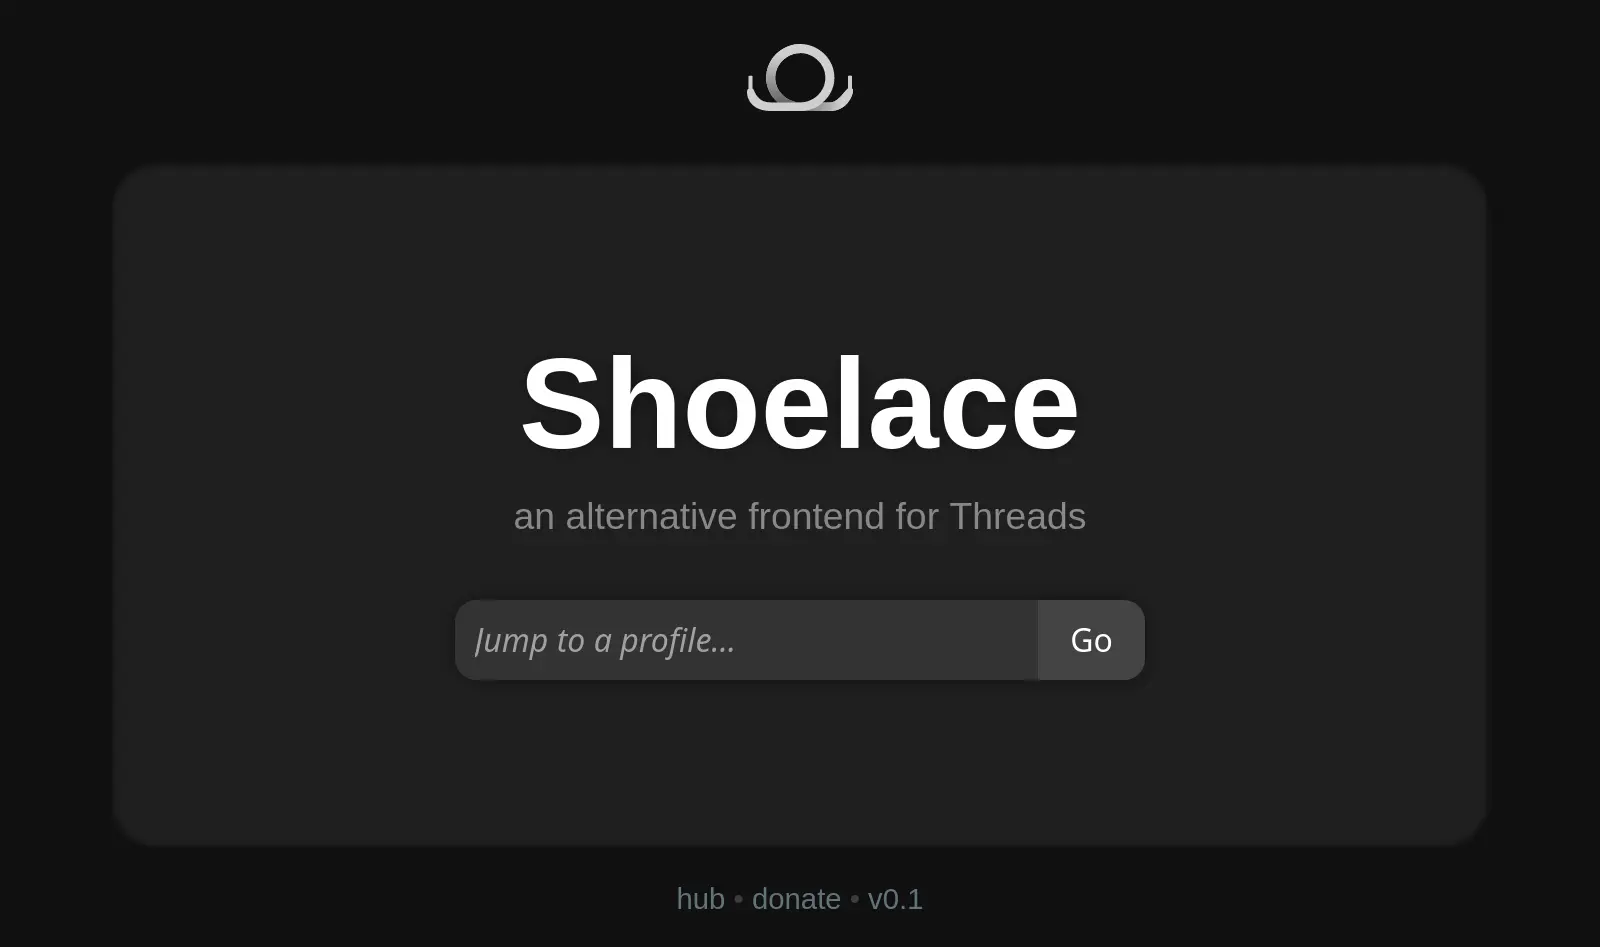 A screenshot of Shoelace's homepage, showing the logo on top, the title "Shoelace", the subtitle "an alternative frontend for Threads", an input bar with the tooltip "Jump to a profile...", and at the bottom three links: "hub", "donate", and "v0.1".